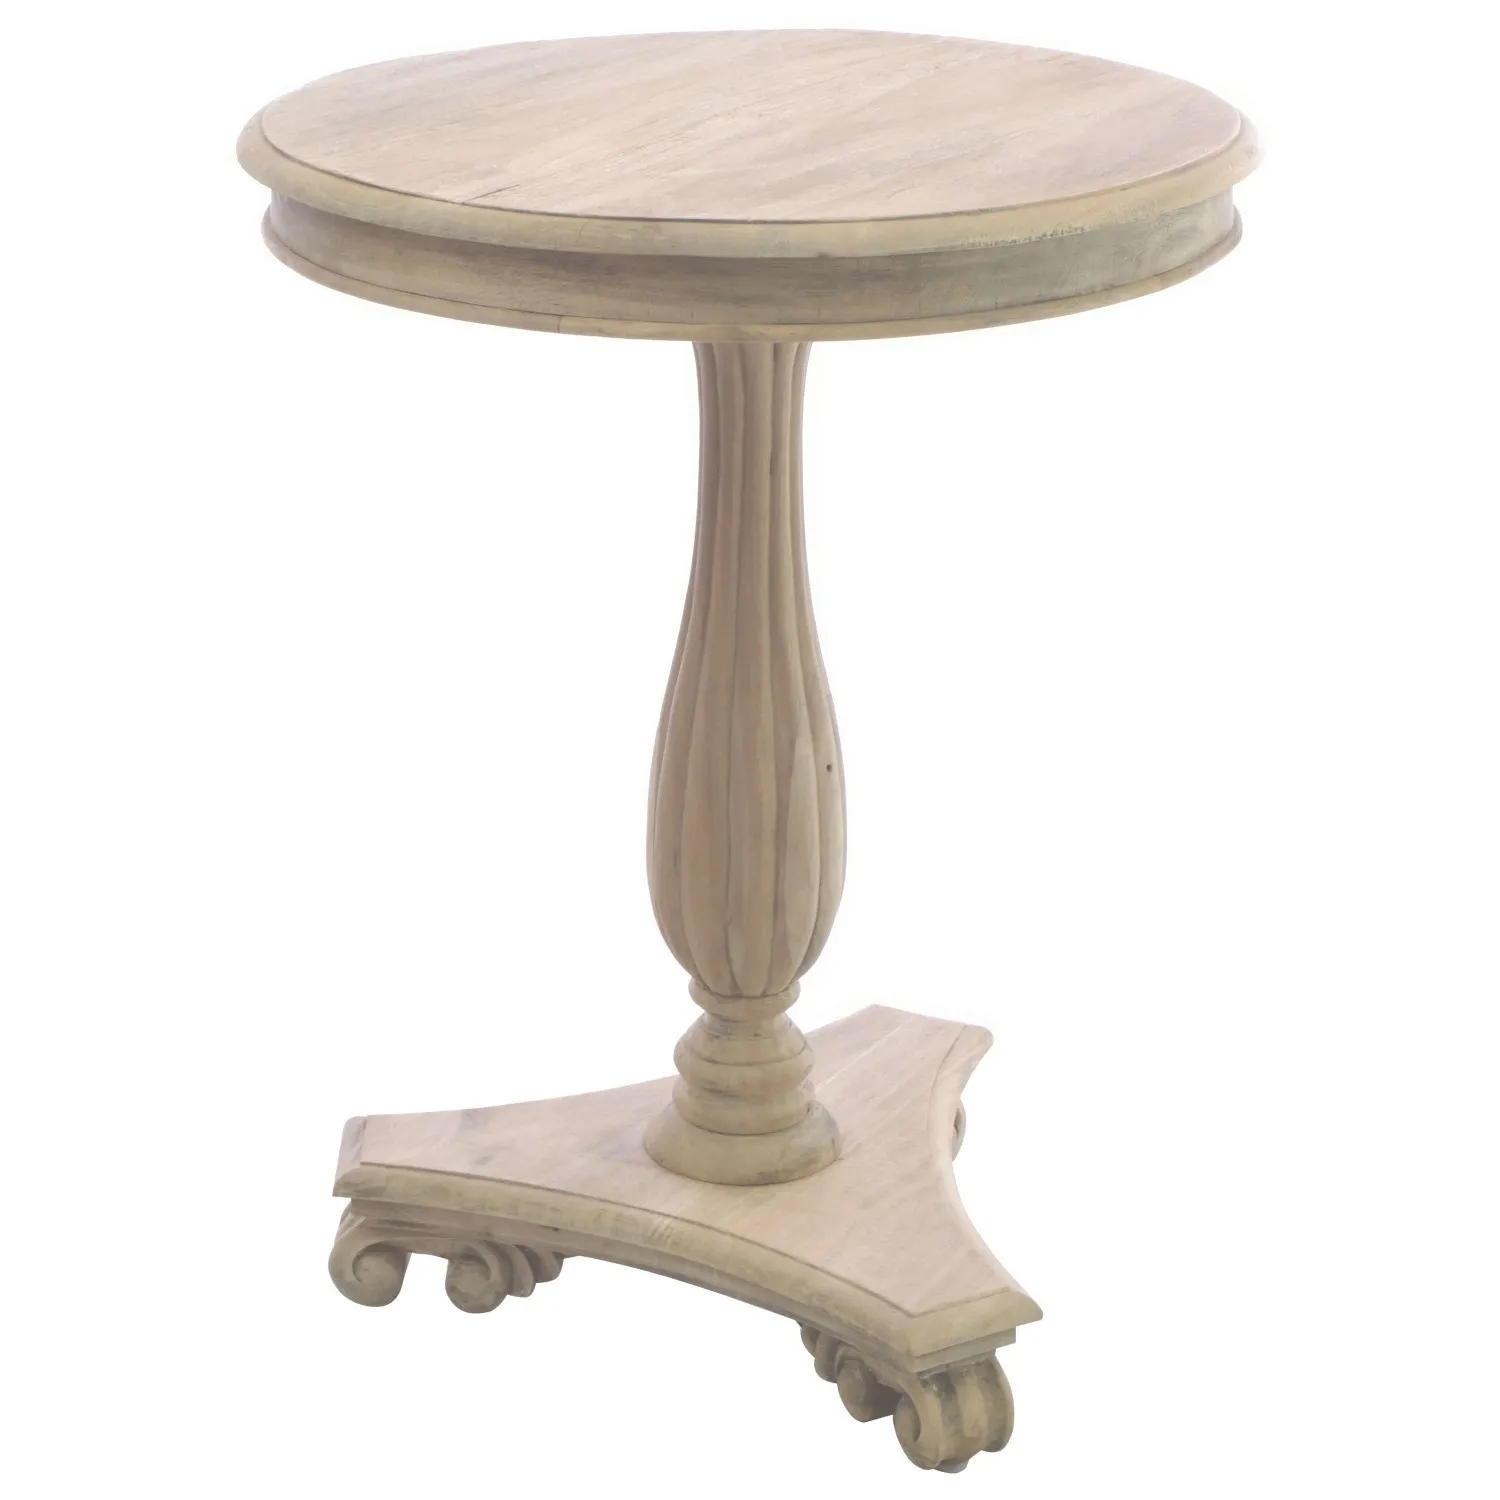 Traditional Wooden Round Lamp Table